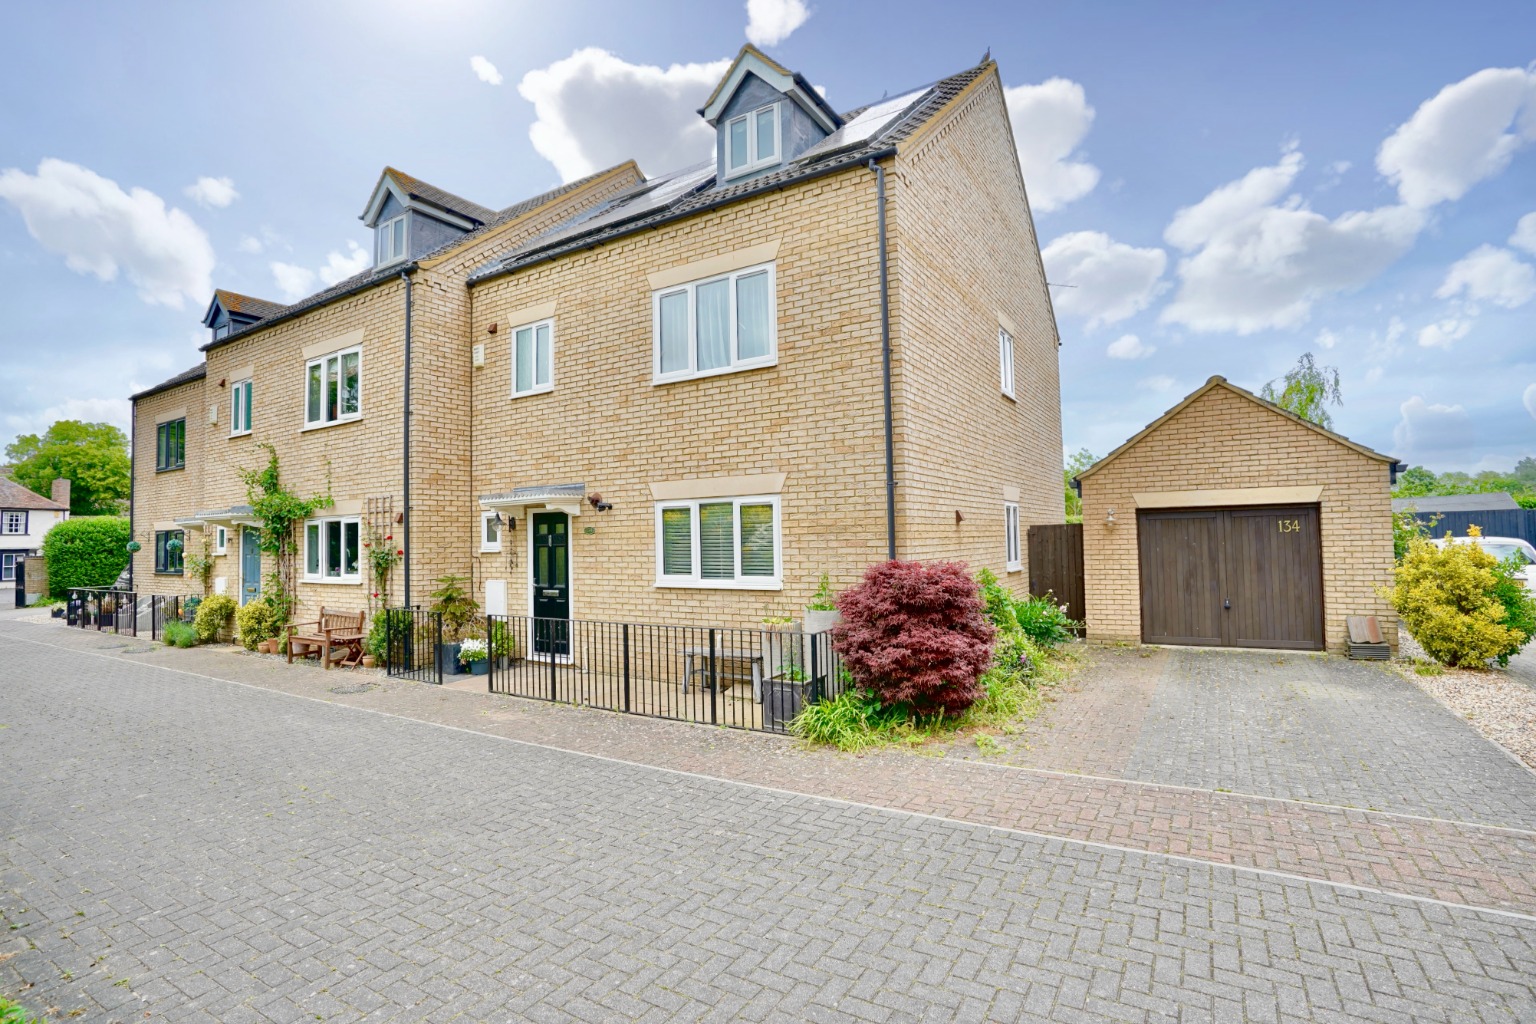 4 bed end of terrace house for sale in St. Neots Road, St. Neots, PE19